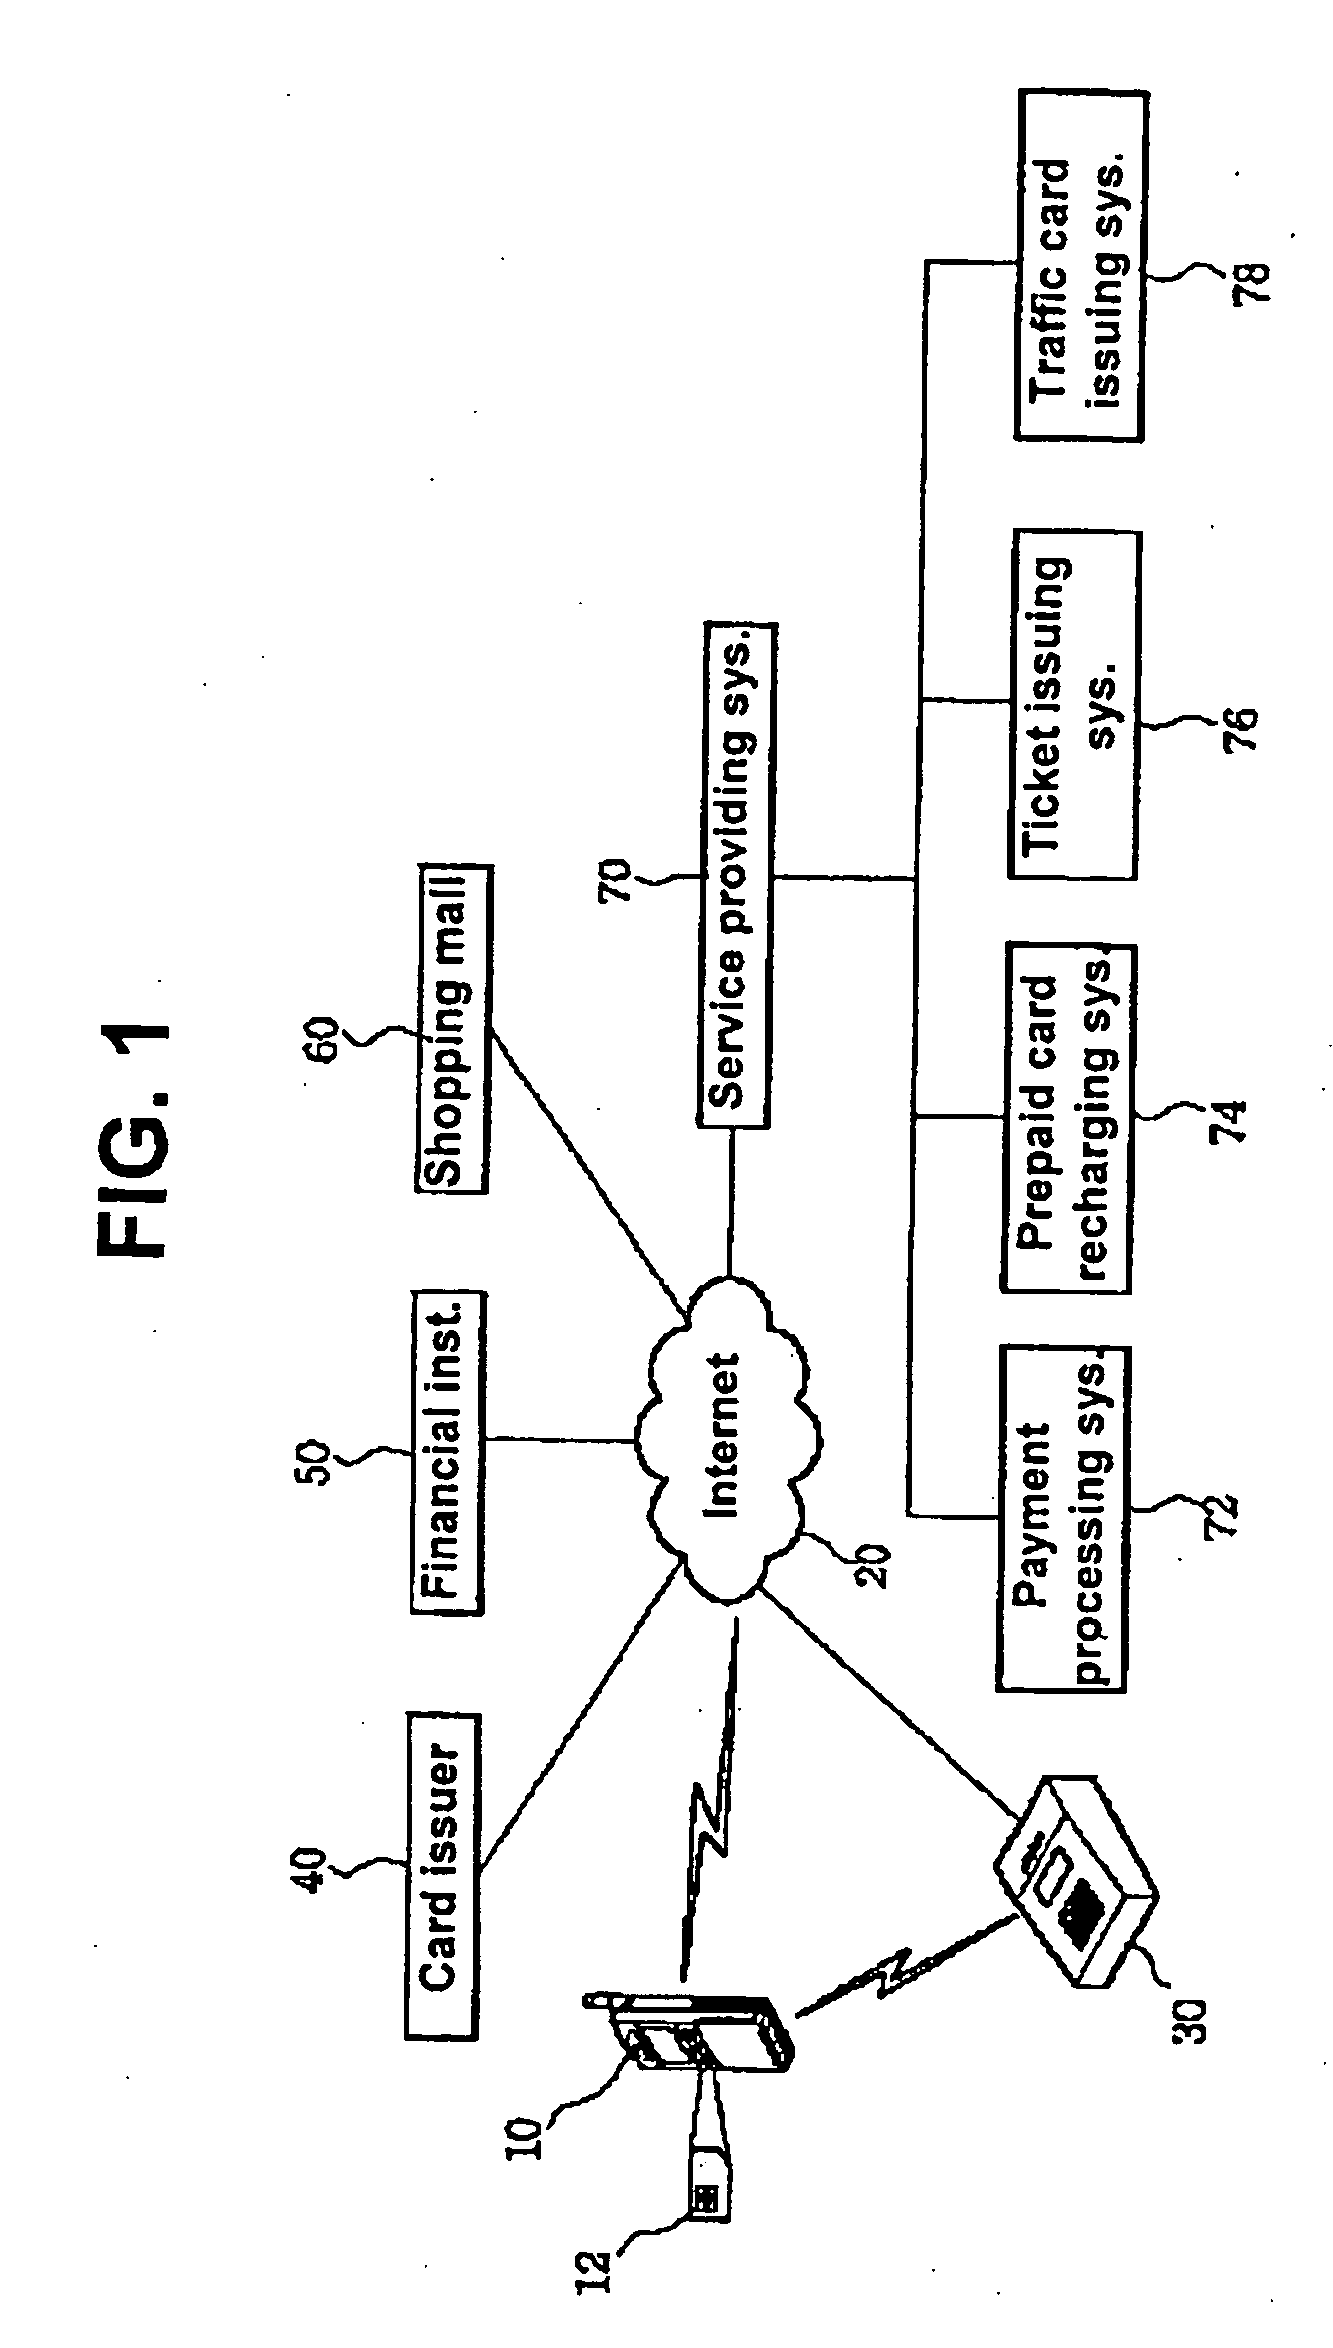 Mobile terminal with user identification card including personal finance-related information and method of using a value-added mobile service through said mobile terminal